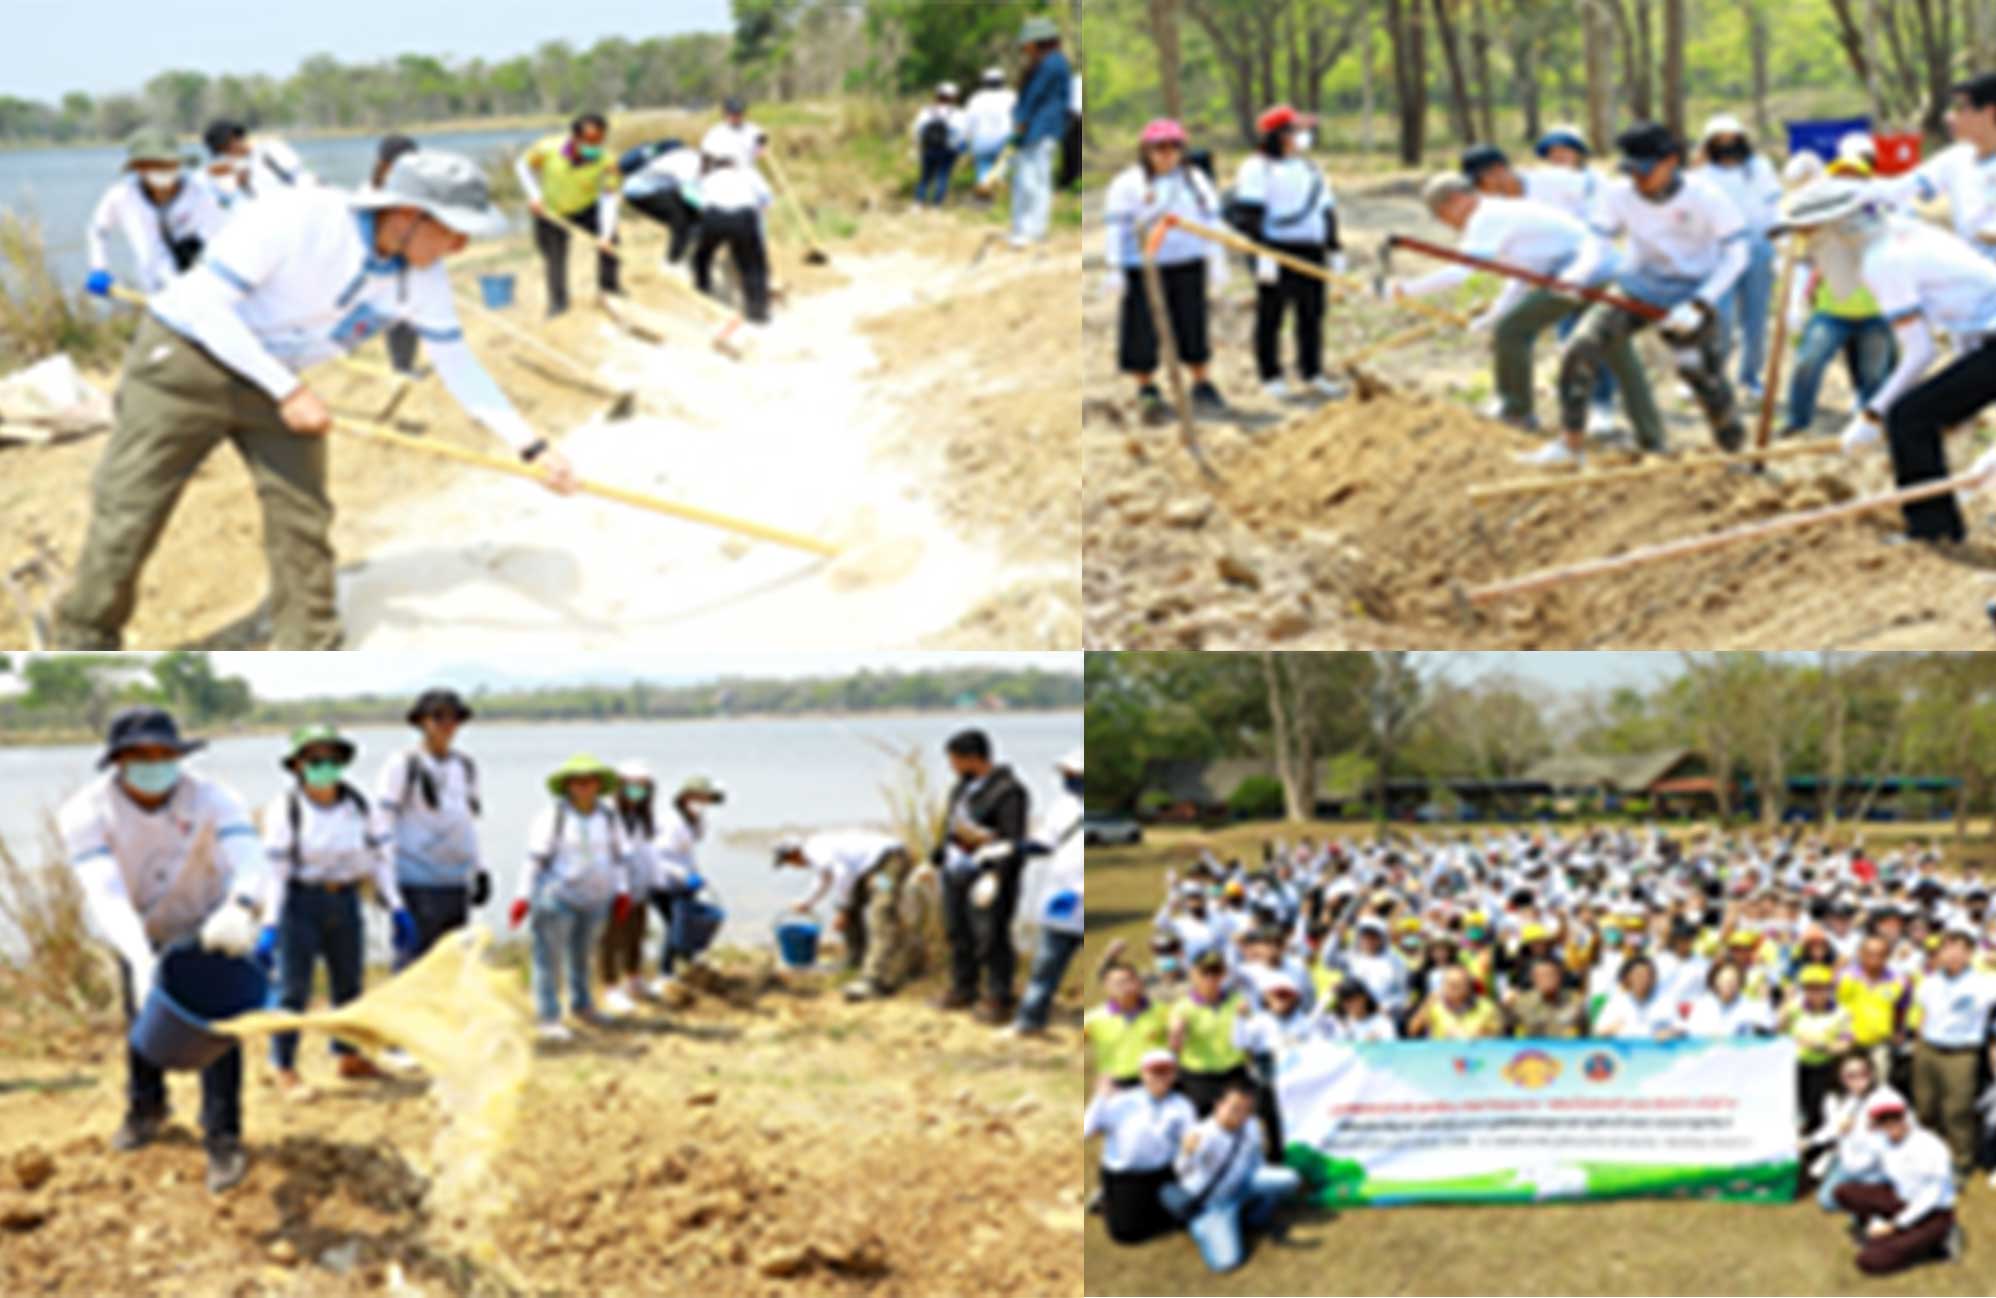 Elephant Salt Lick Promotion Project Supported by Honda Thailand Foundation